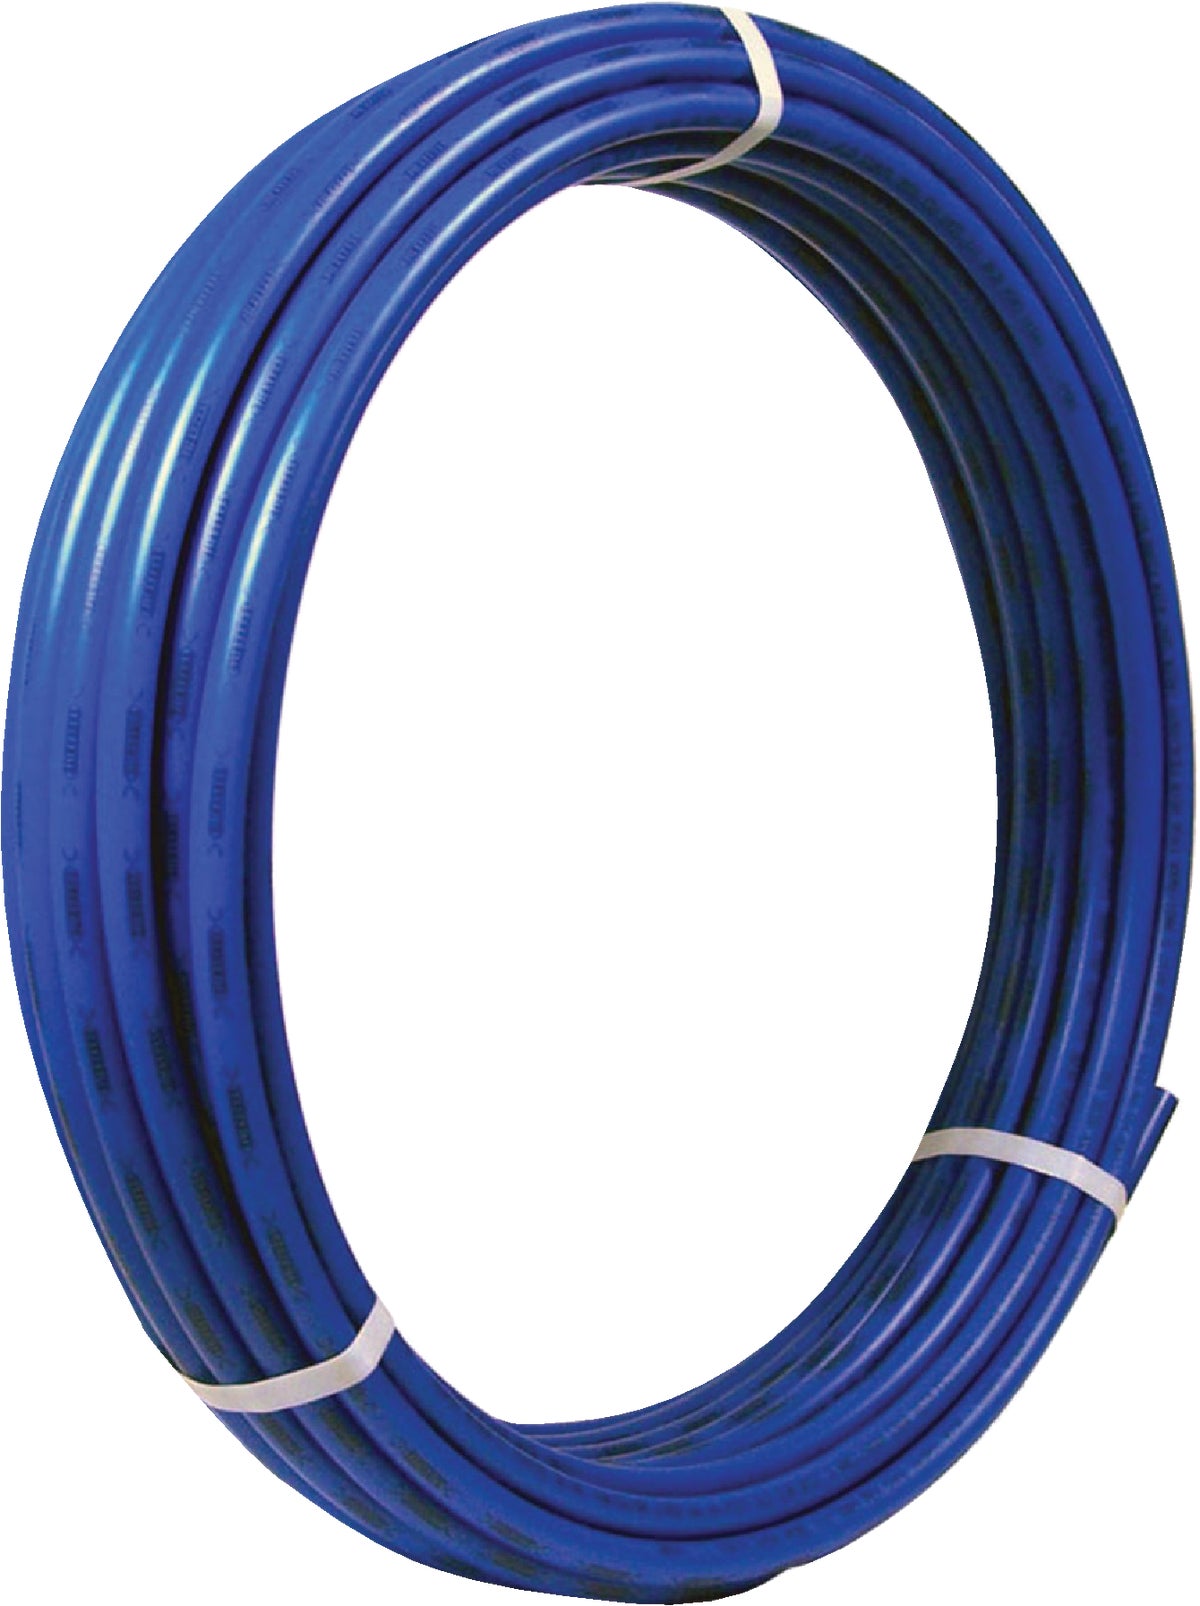 3/4" x 100ft PEX Tubing for Potable Water FREE SHIPPING 